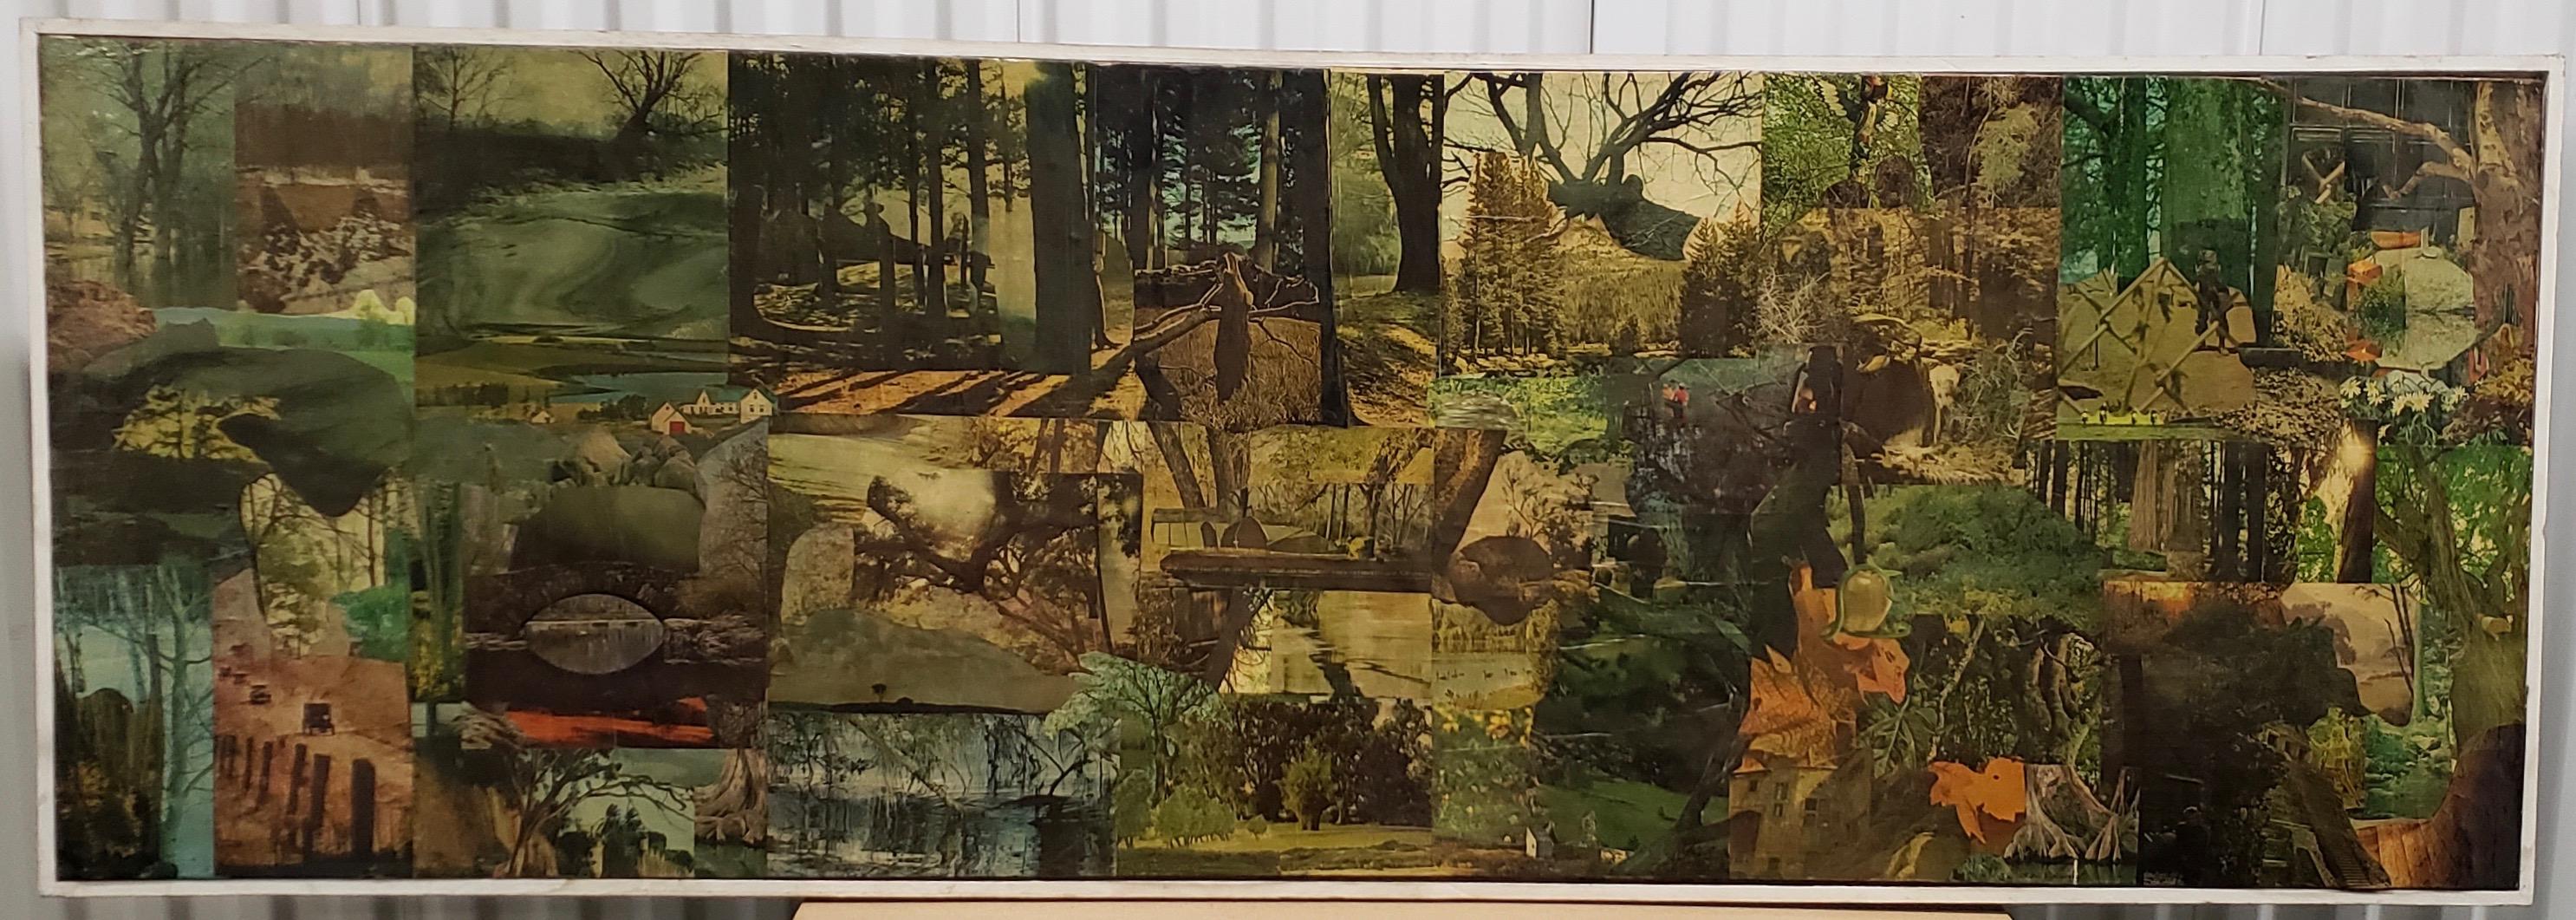 Vintage Large Scale Collage on Board by Peter Sword c.1970s - Mixed Media Art by Unknown